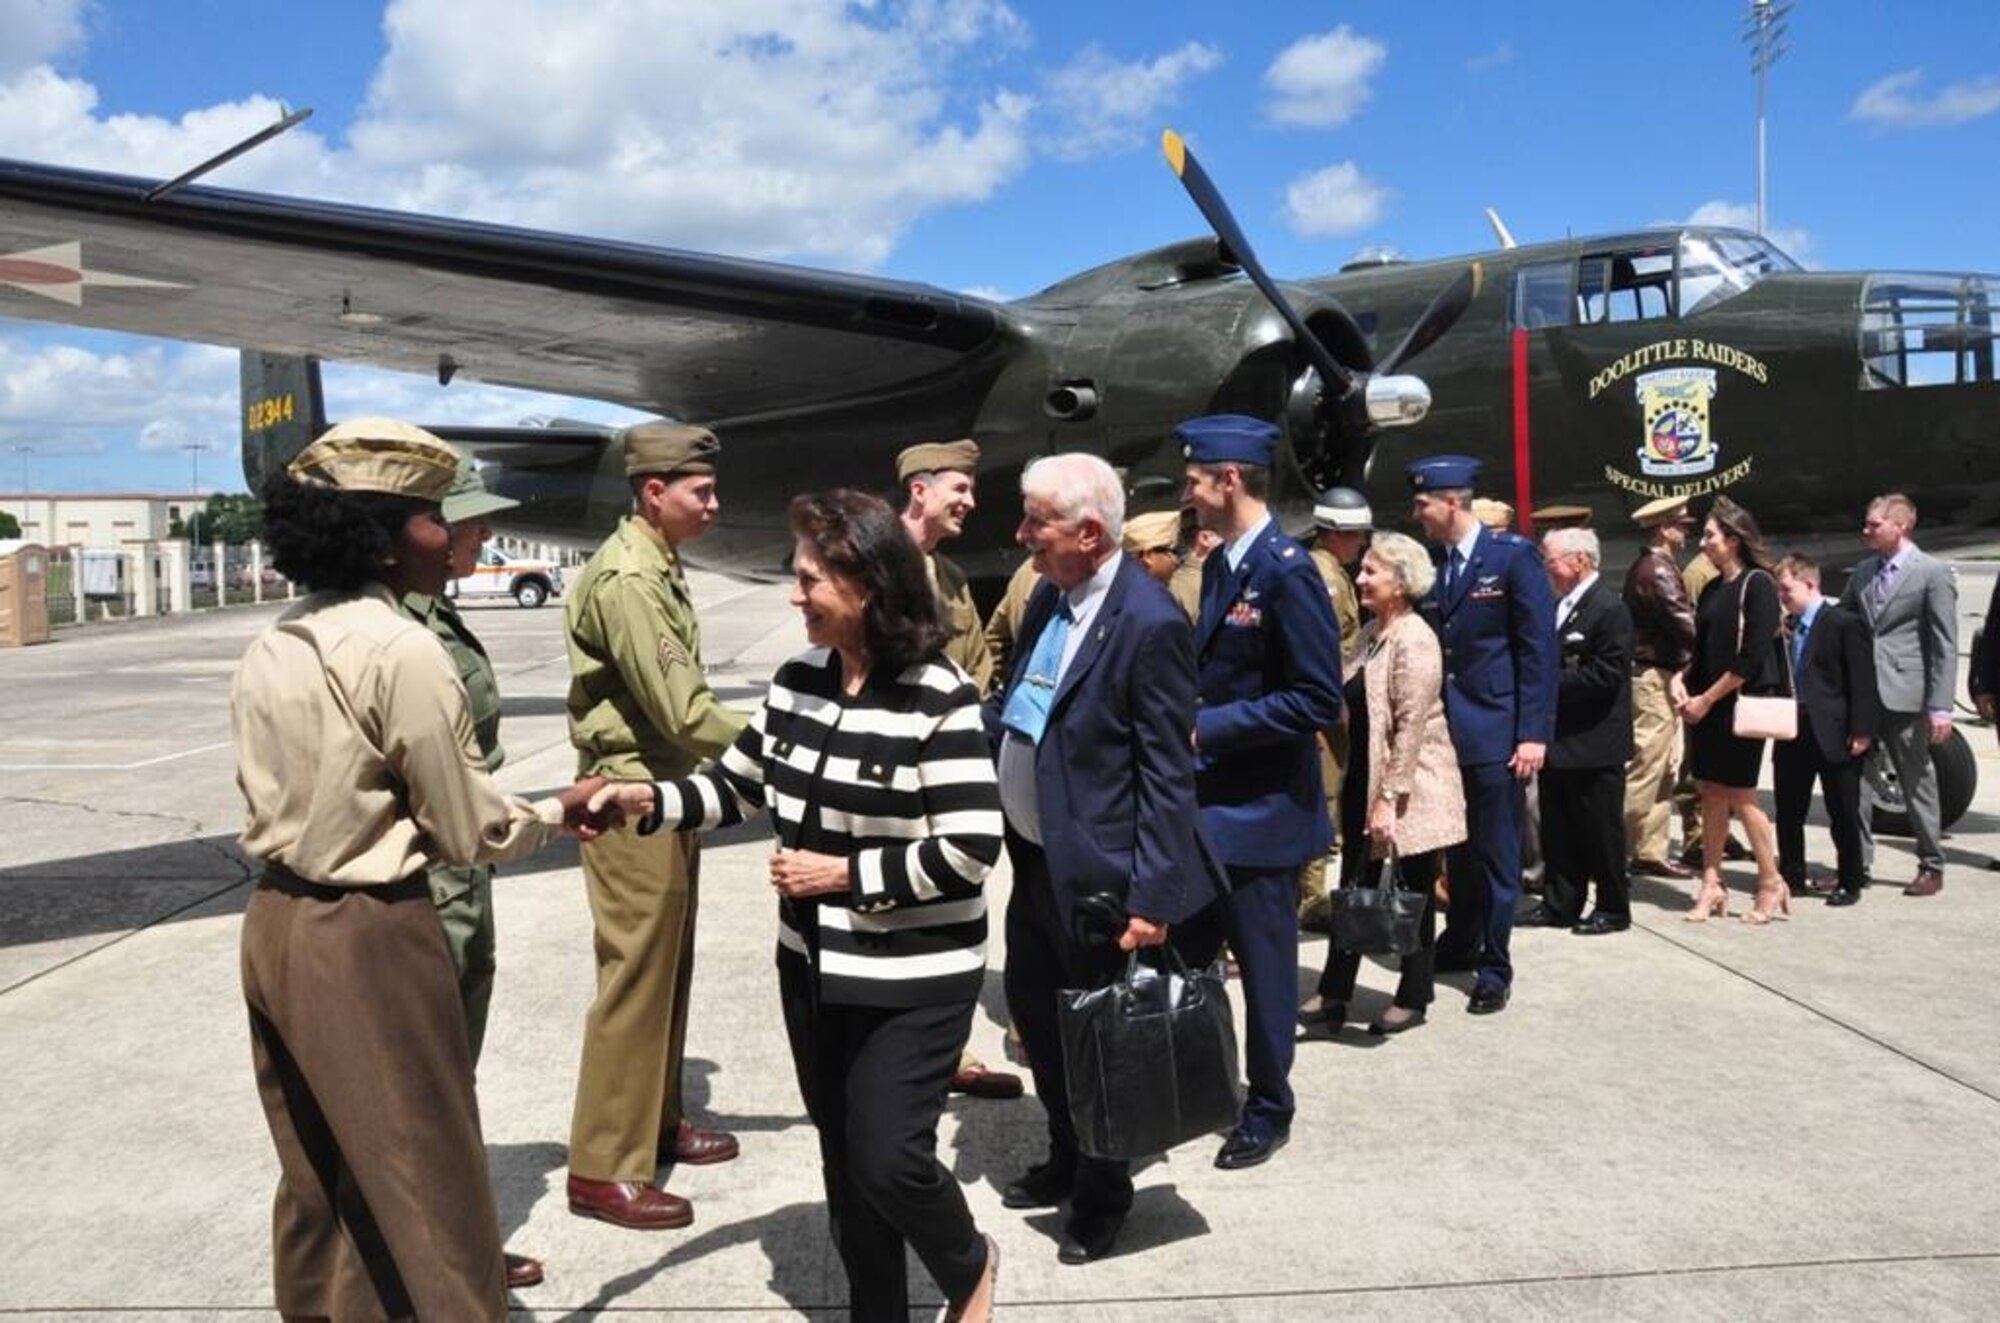 The family of retired Air Force Lt. Col. Richard “Dick” E. Cole look at a B-25 Mitchell static display during a memorial service for their father at Joint Base San Antonio-Randolph, Texas, April 18, 2019. Cole, the last surviving Doolittle Raider, was the co-pilot on a B-25 Mitchell for then Col. Jimmy Doolittle during the storied World War II Doolittle Tokyo Raid. (U.S. Air Force photo by Tech. Sgt. Ave Young)